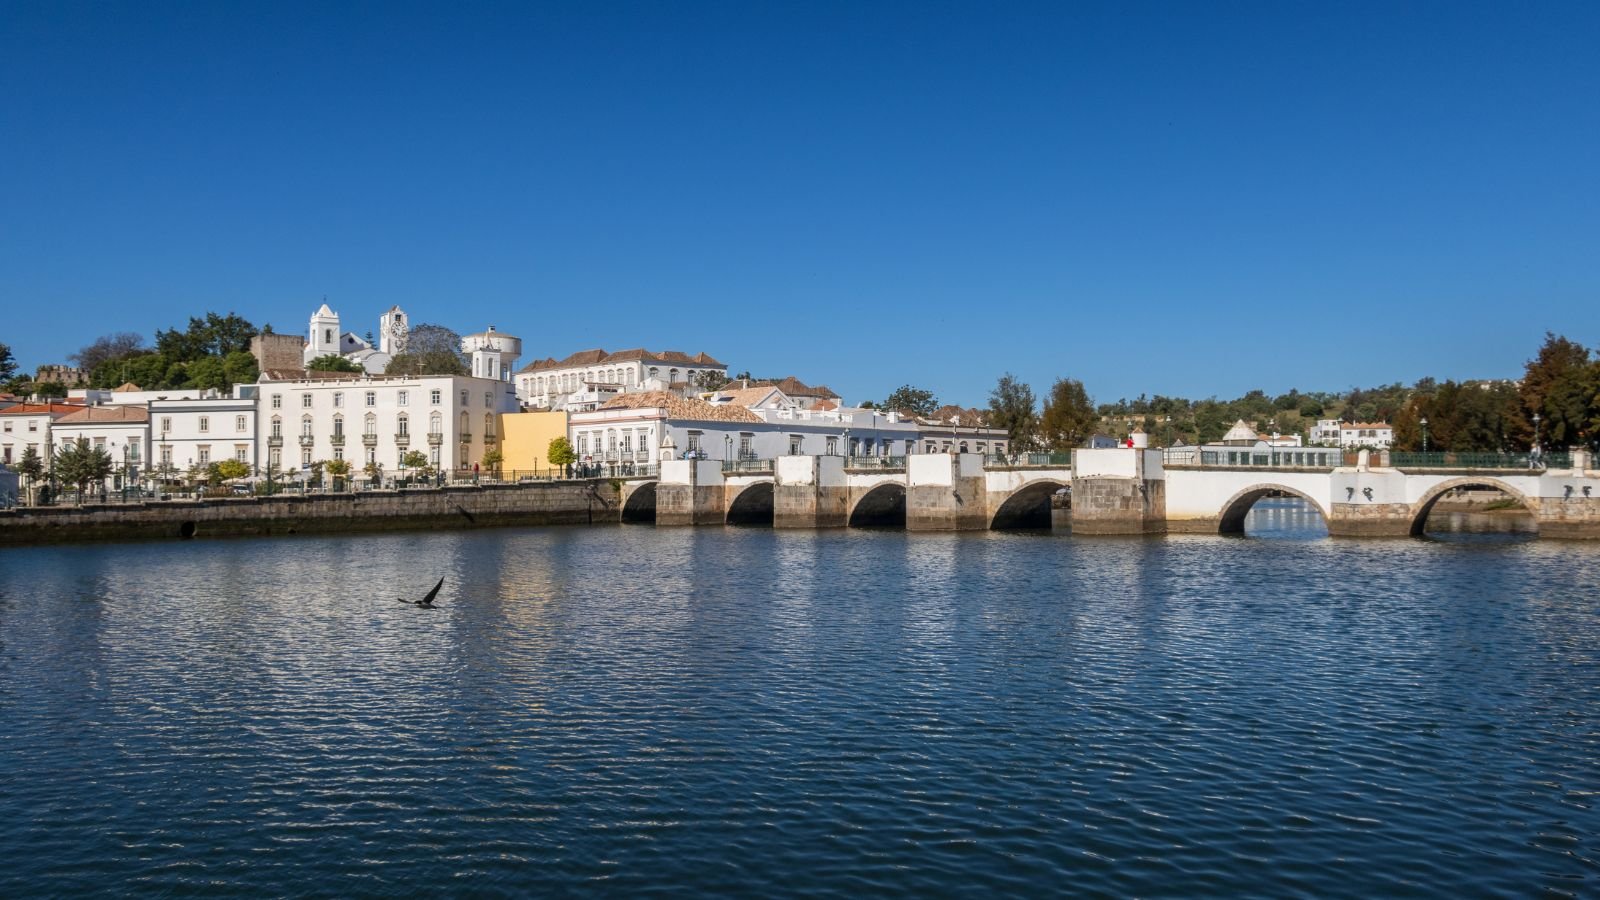 <p><a href="https://livingcost.org/cost/portugal" rel="noopener">Average Cost Of Living</a> (Per Person)- $523</p> <p>Average Rent and Utilities (Per Person)- $763</p> <p>The Eastern Algarve of Portugal is a destination where retirees and families can enjoy the charm of Europe without the hefty price tag. With a typical monthly cost of living between $1000 to $1500, it provides outstanding value for money in Europe. This tranquil part of the Algarve is dotted with quaint towns and villages that boast safety, accessibility, and a slower pace of life. Portugal’s retirement-friendly visas make it an even more attractive destination for those looking to settle down.</p>